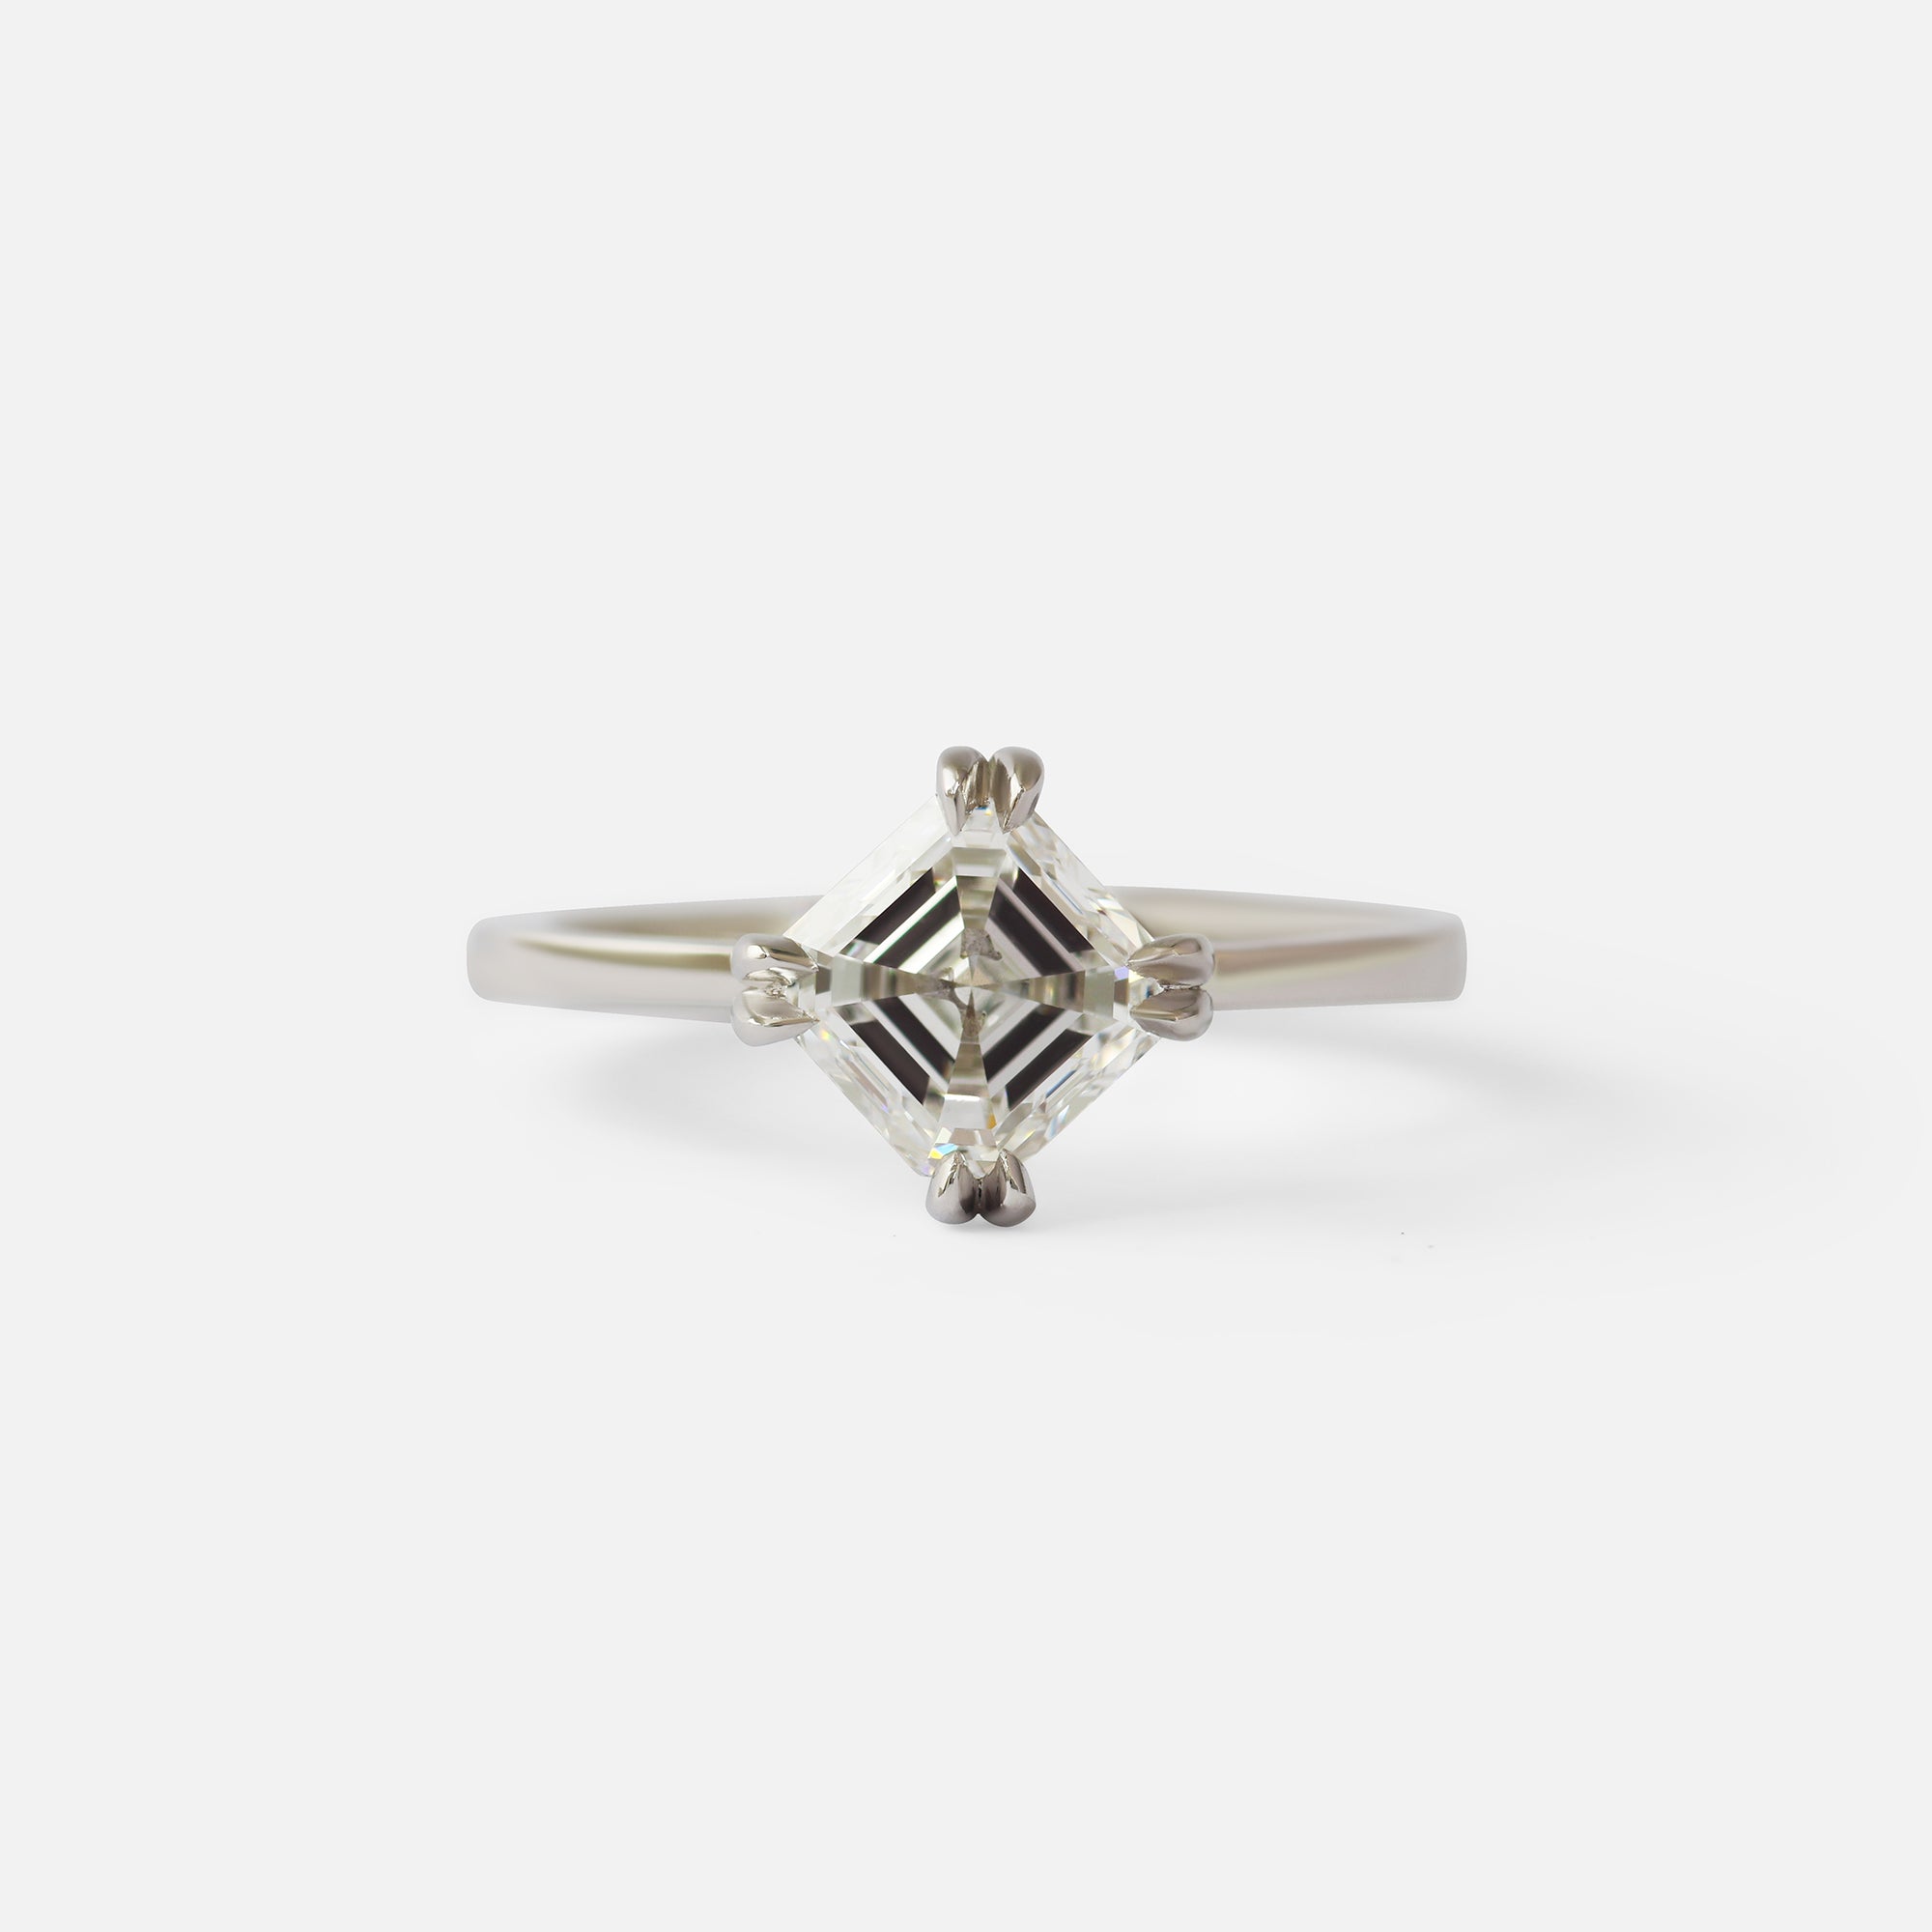 Ash / Asscher Cut Diamond Ring By fitzgerald jewelry in ENGAGEMENT Category